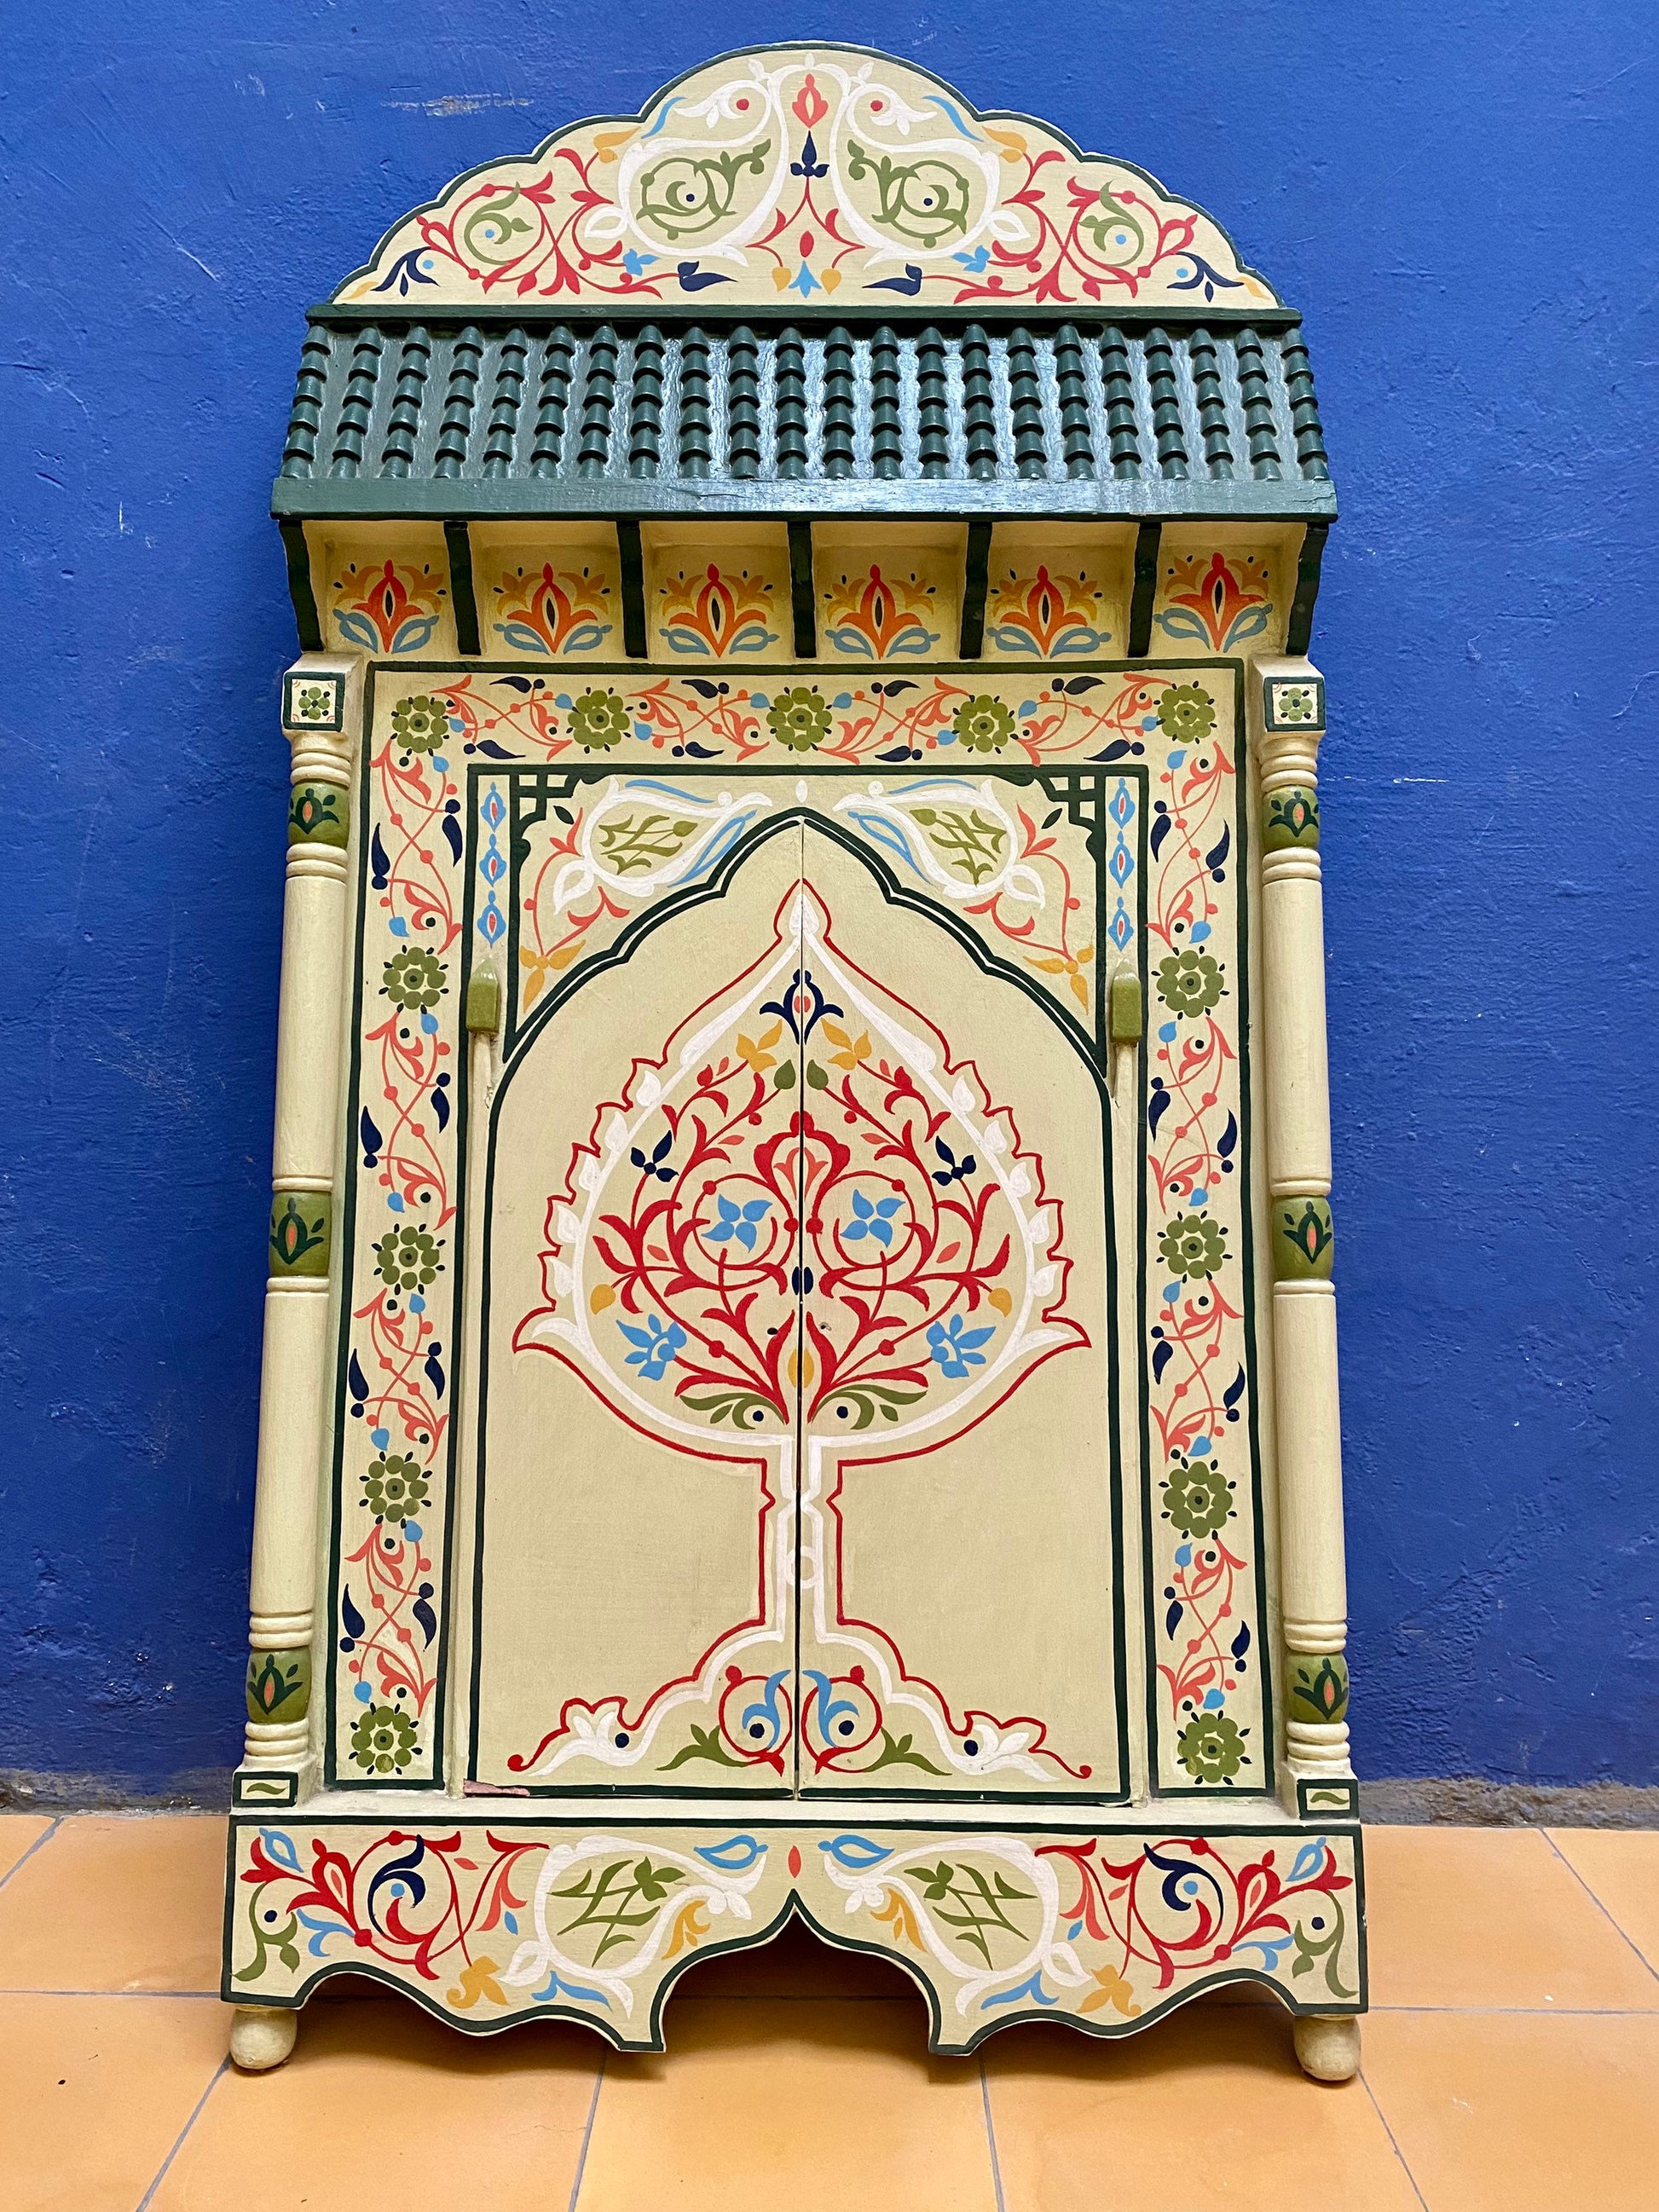 47"x23" Moroccan hand-painted Geometric pattern mirror,Exotic Artisanal Wall mirror,Handmade Unique Decorative Colorful Floral motif mirror